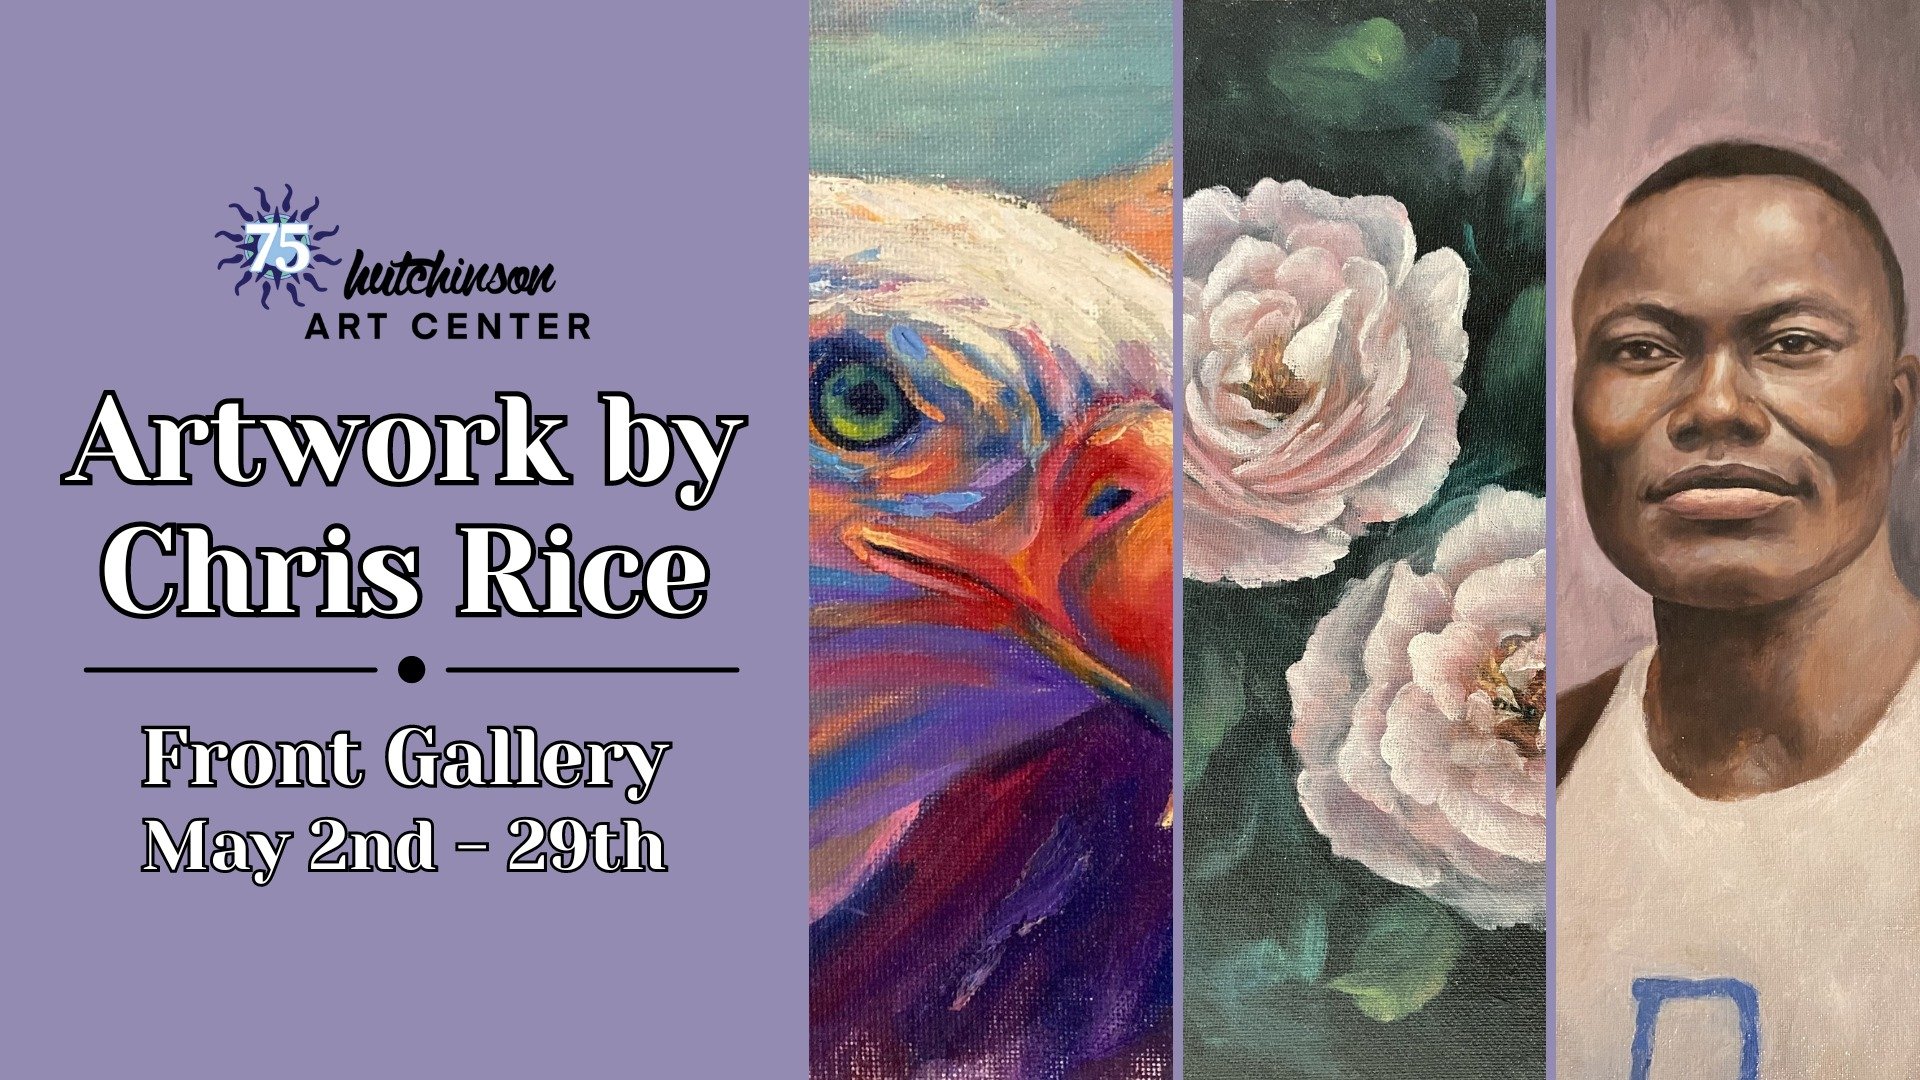 Coming to the our Front Gallery at the beginning of May is the work of local artist Chris Rice!

A self-taught artist, Chris Rice is an extremely talented painter of stunning floral still life, nature, and portraiture. This artist is grateful for his